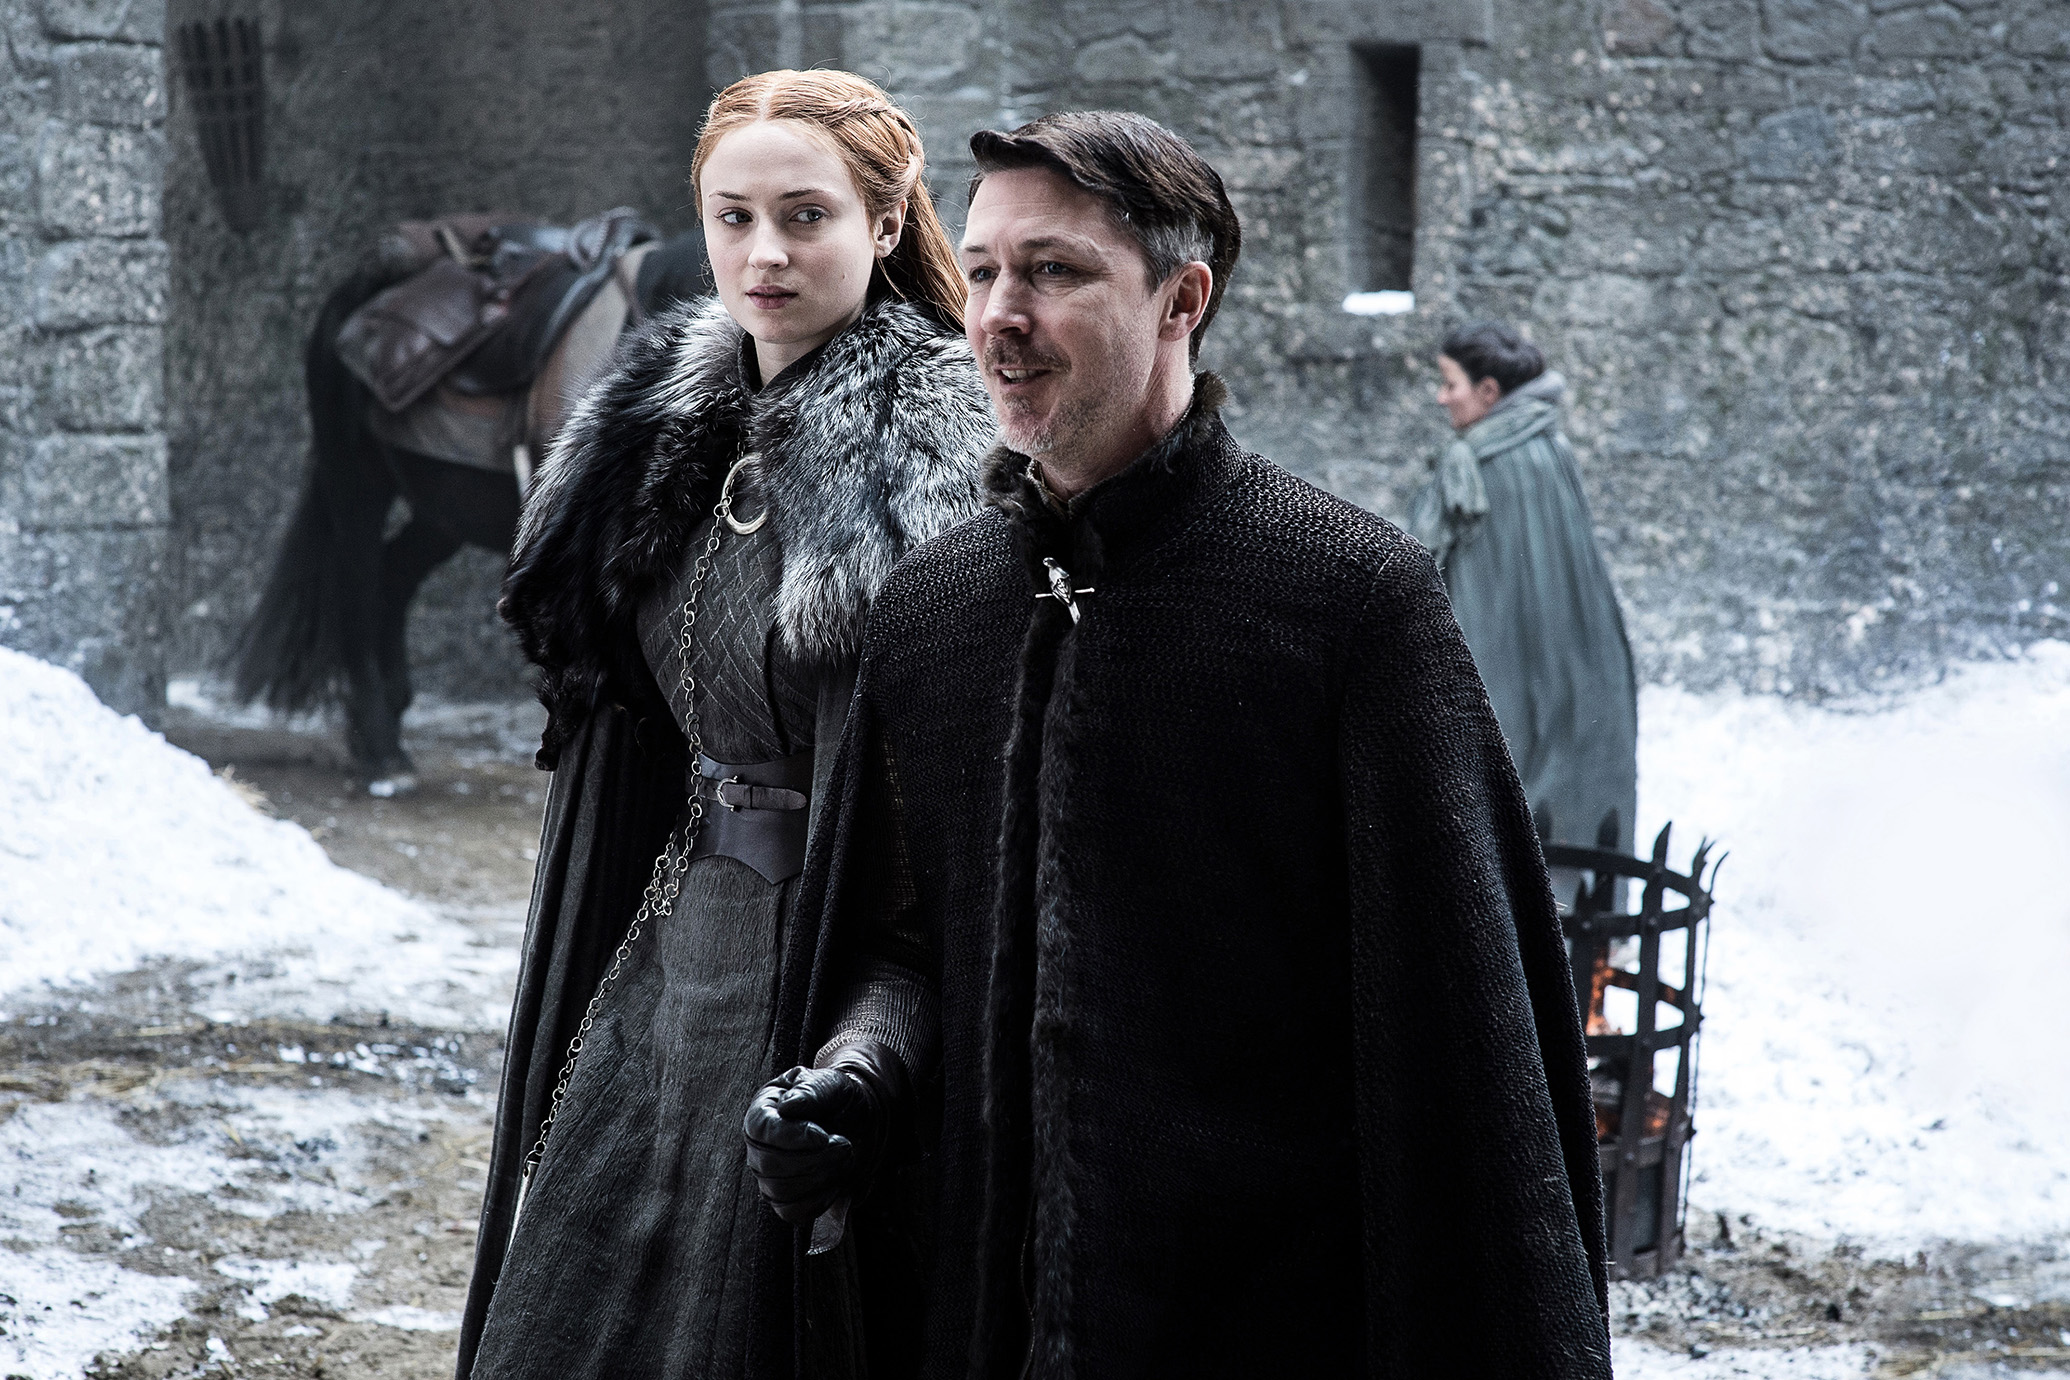 Sophie Turner and Aidan Gillen, Game of Thrones